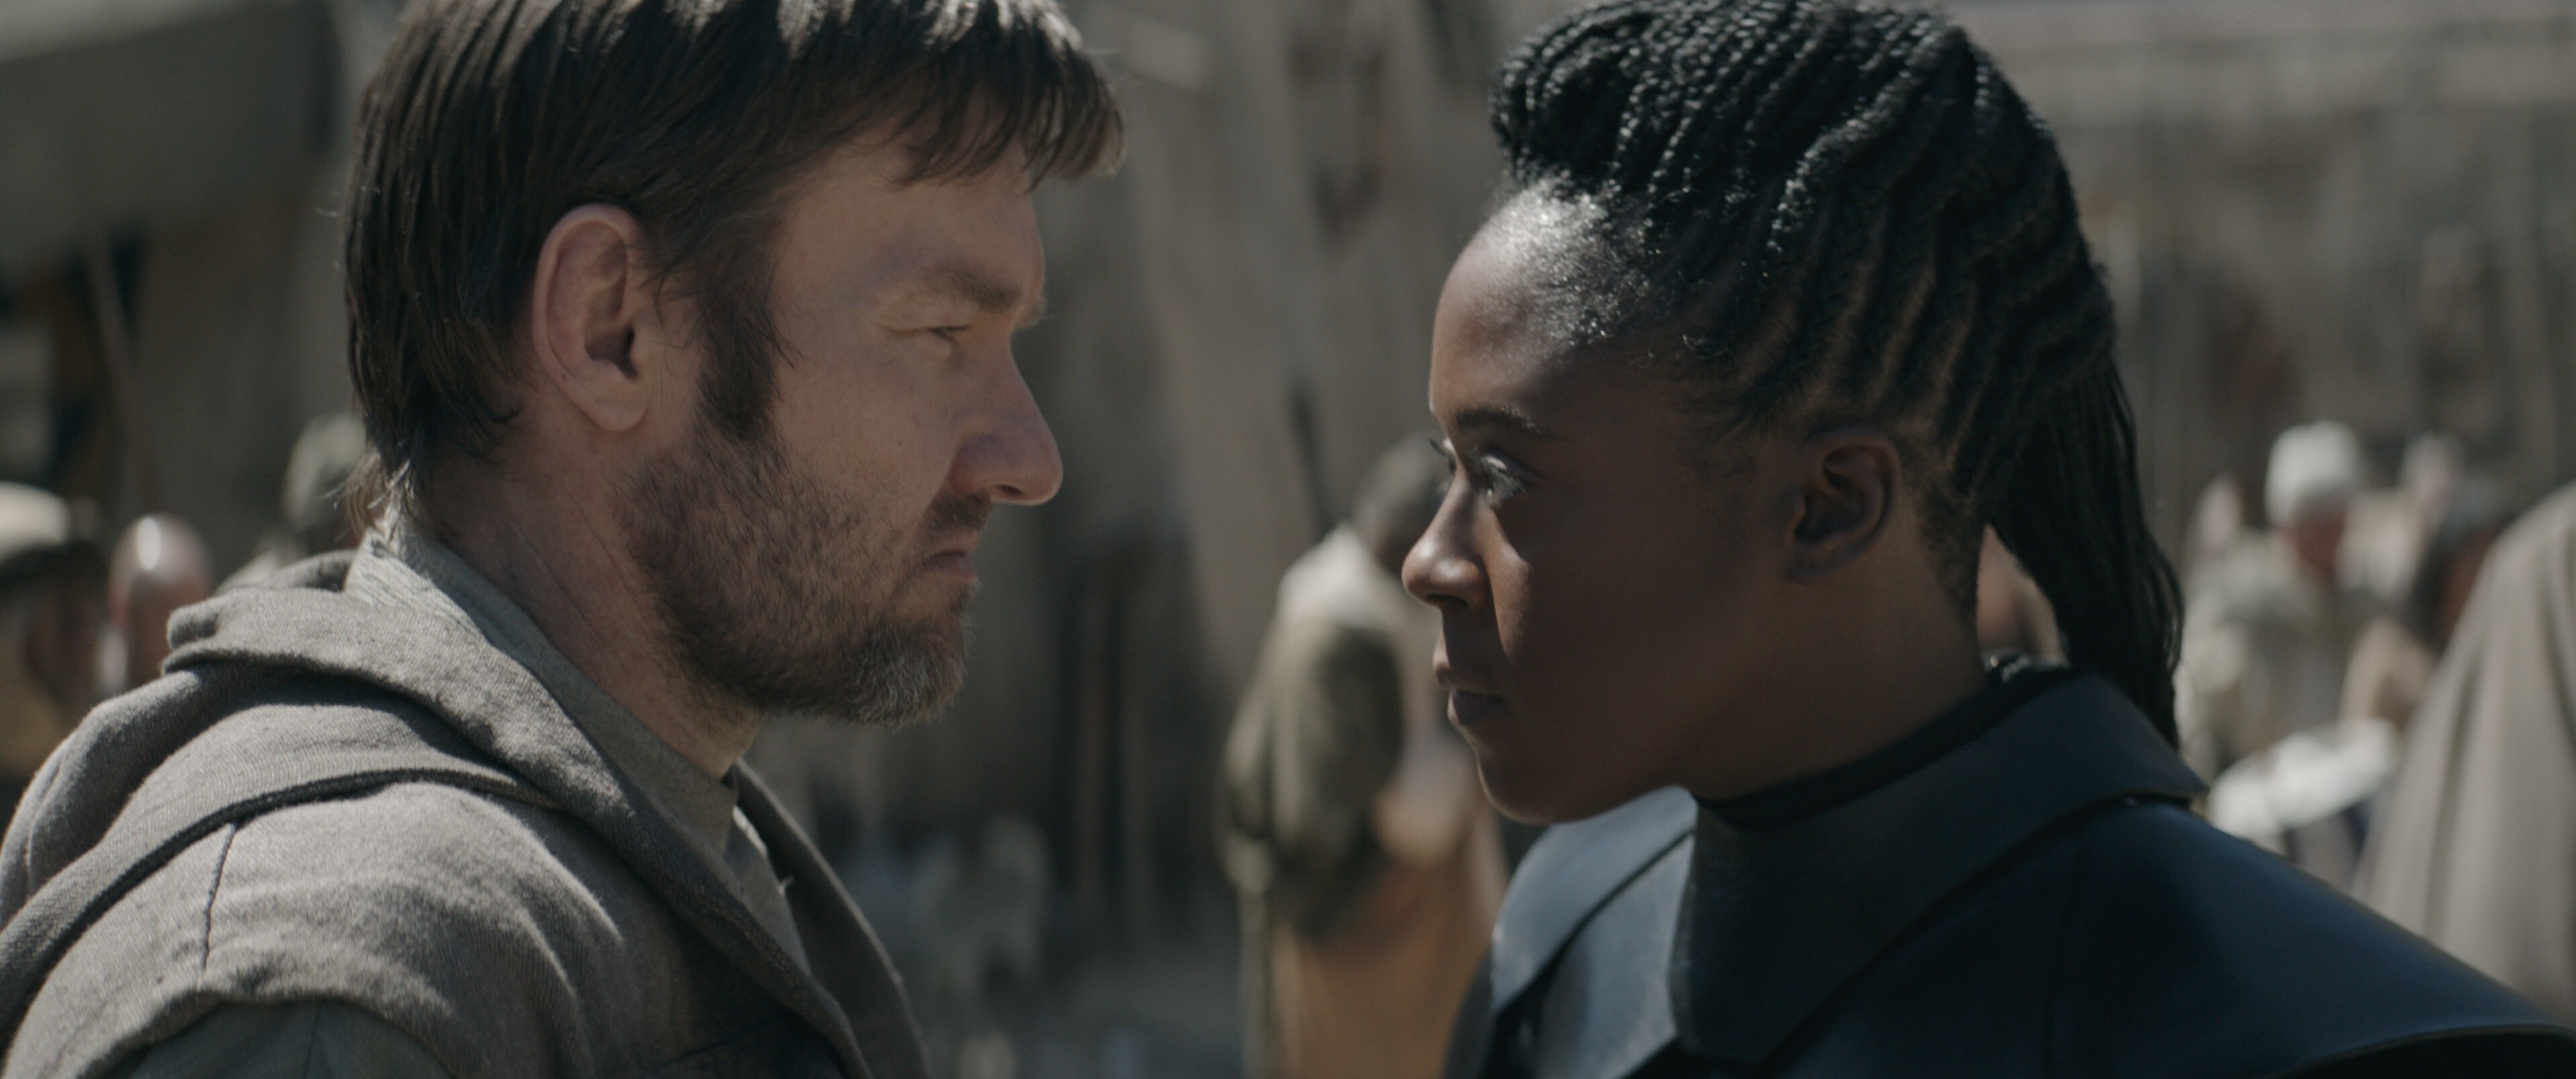 Owen Lars, played by Joel Edgerton, faces off with Reva Sevander, played by Moses Ingram.